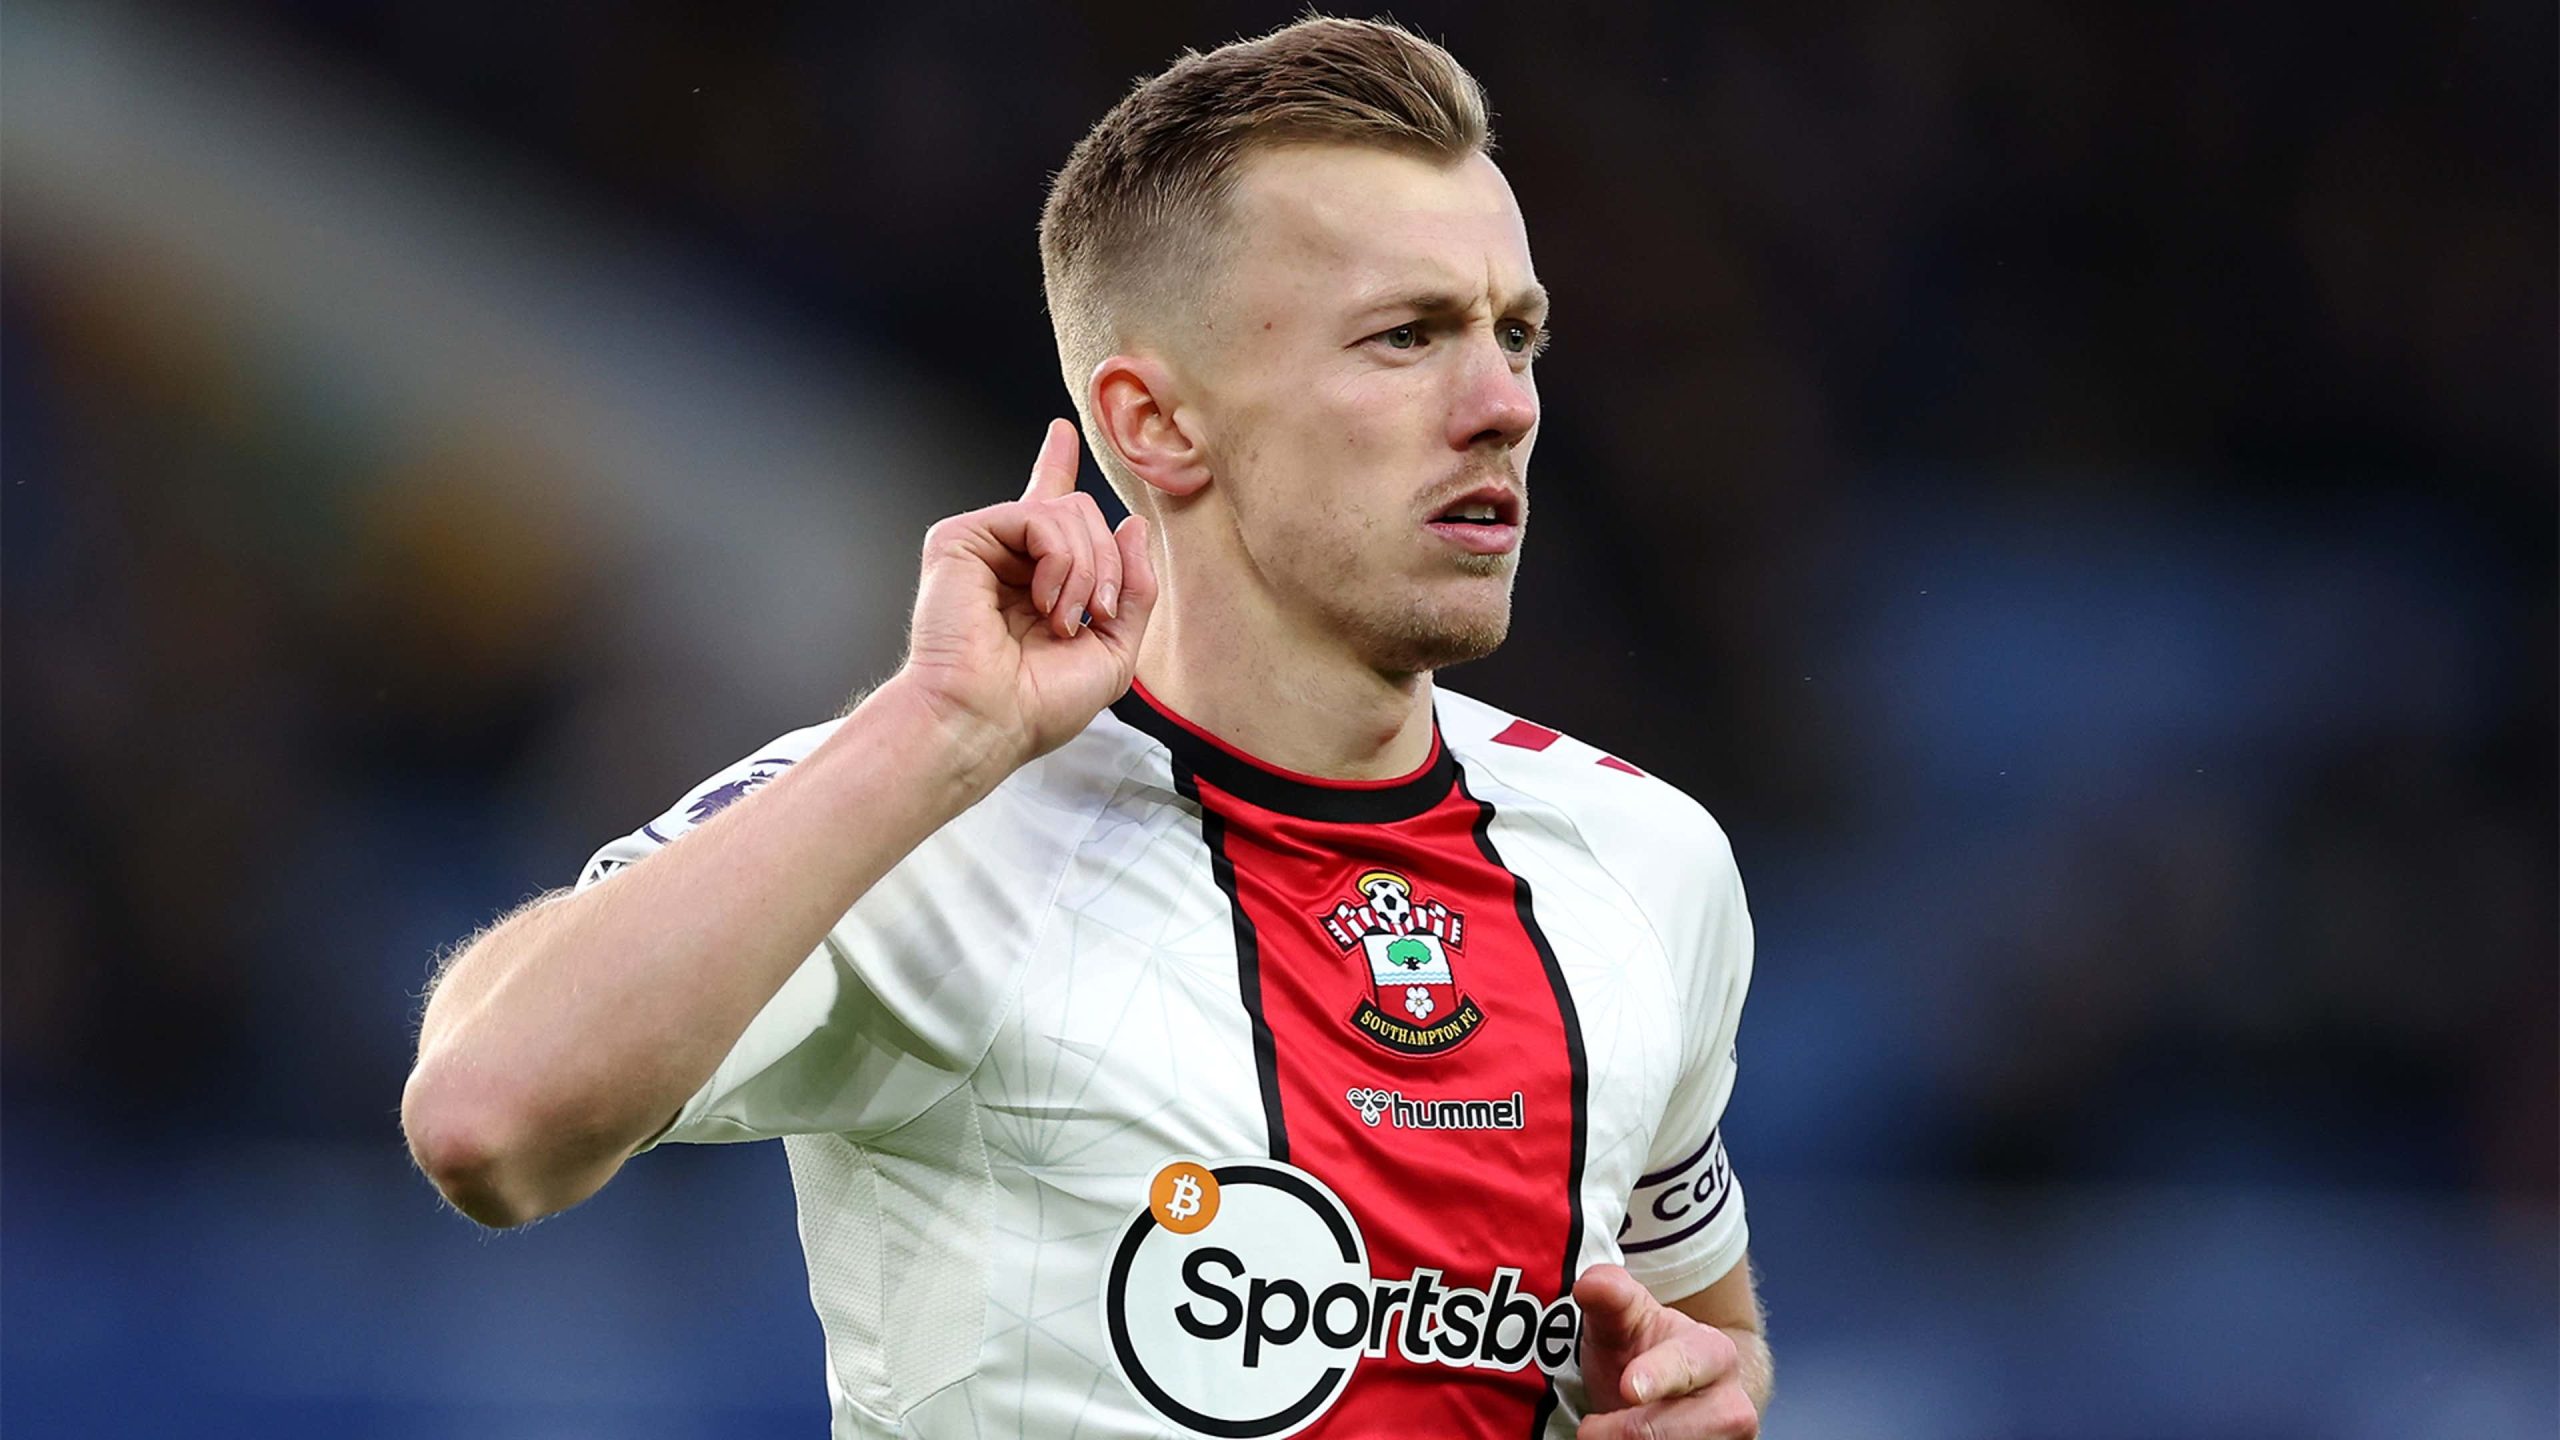 Brown Believes that Moyes Made a Great Transfer by Signing Ward-Prowse from Southampton